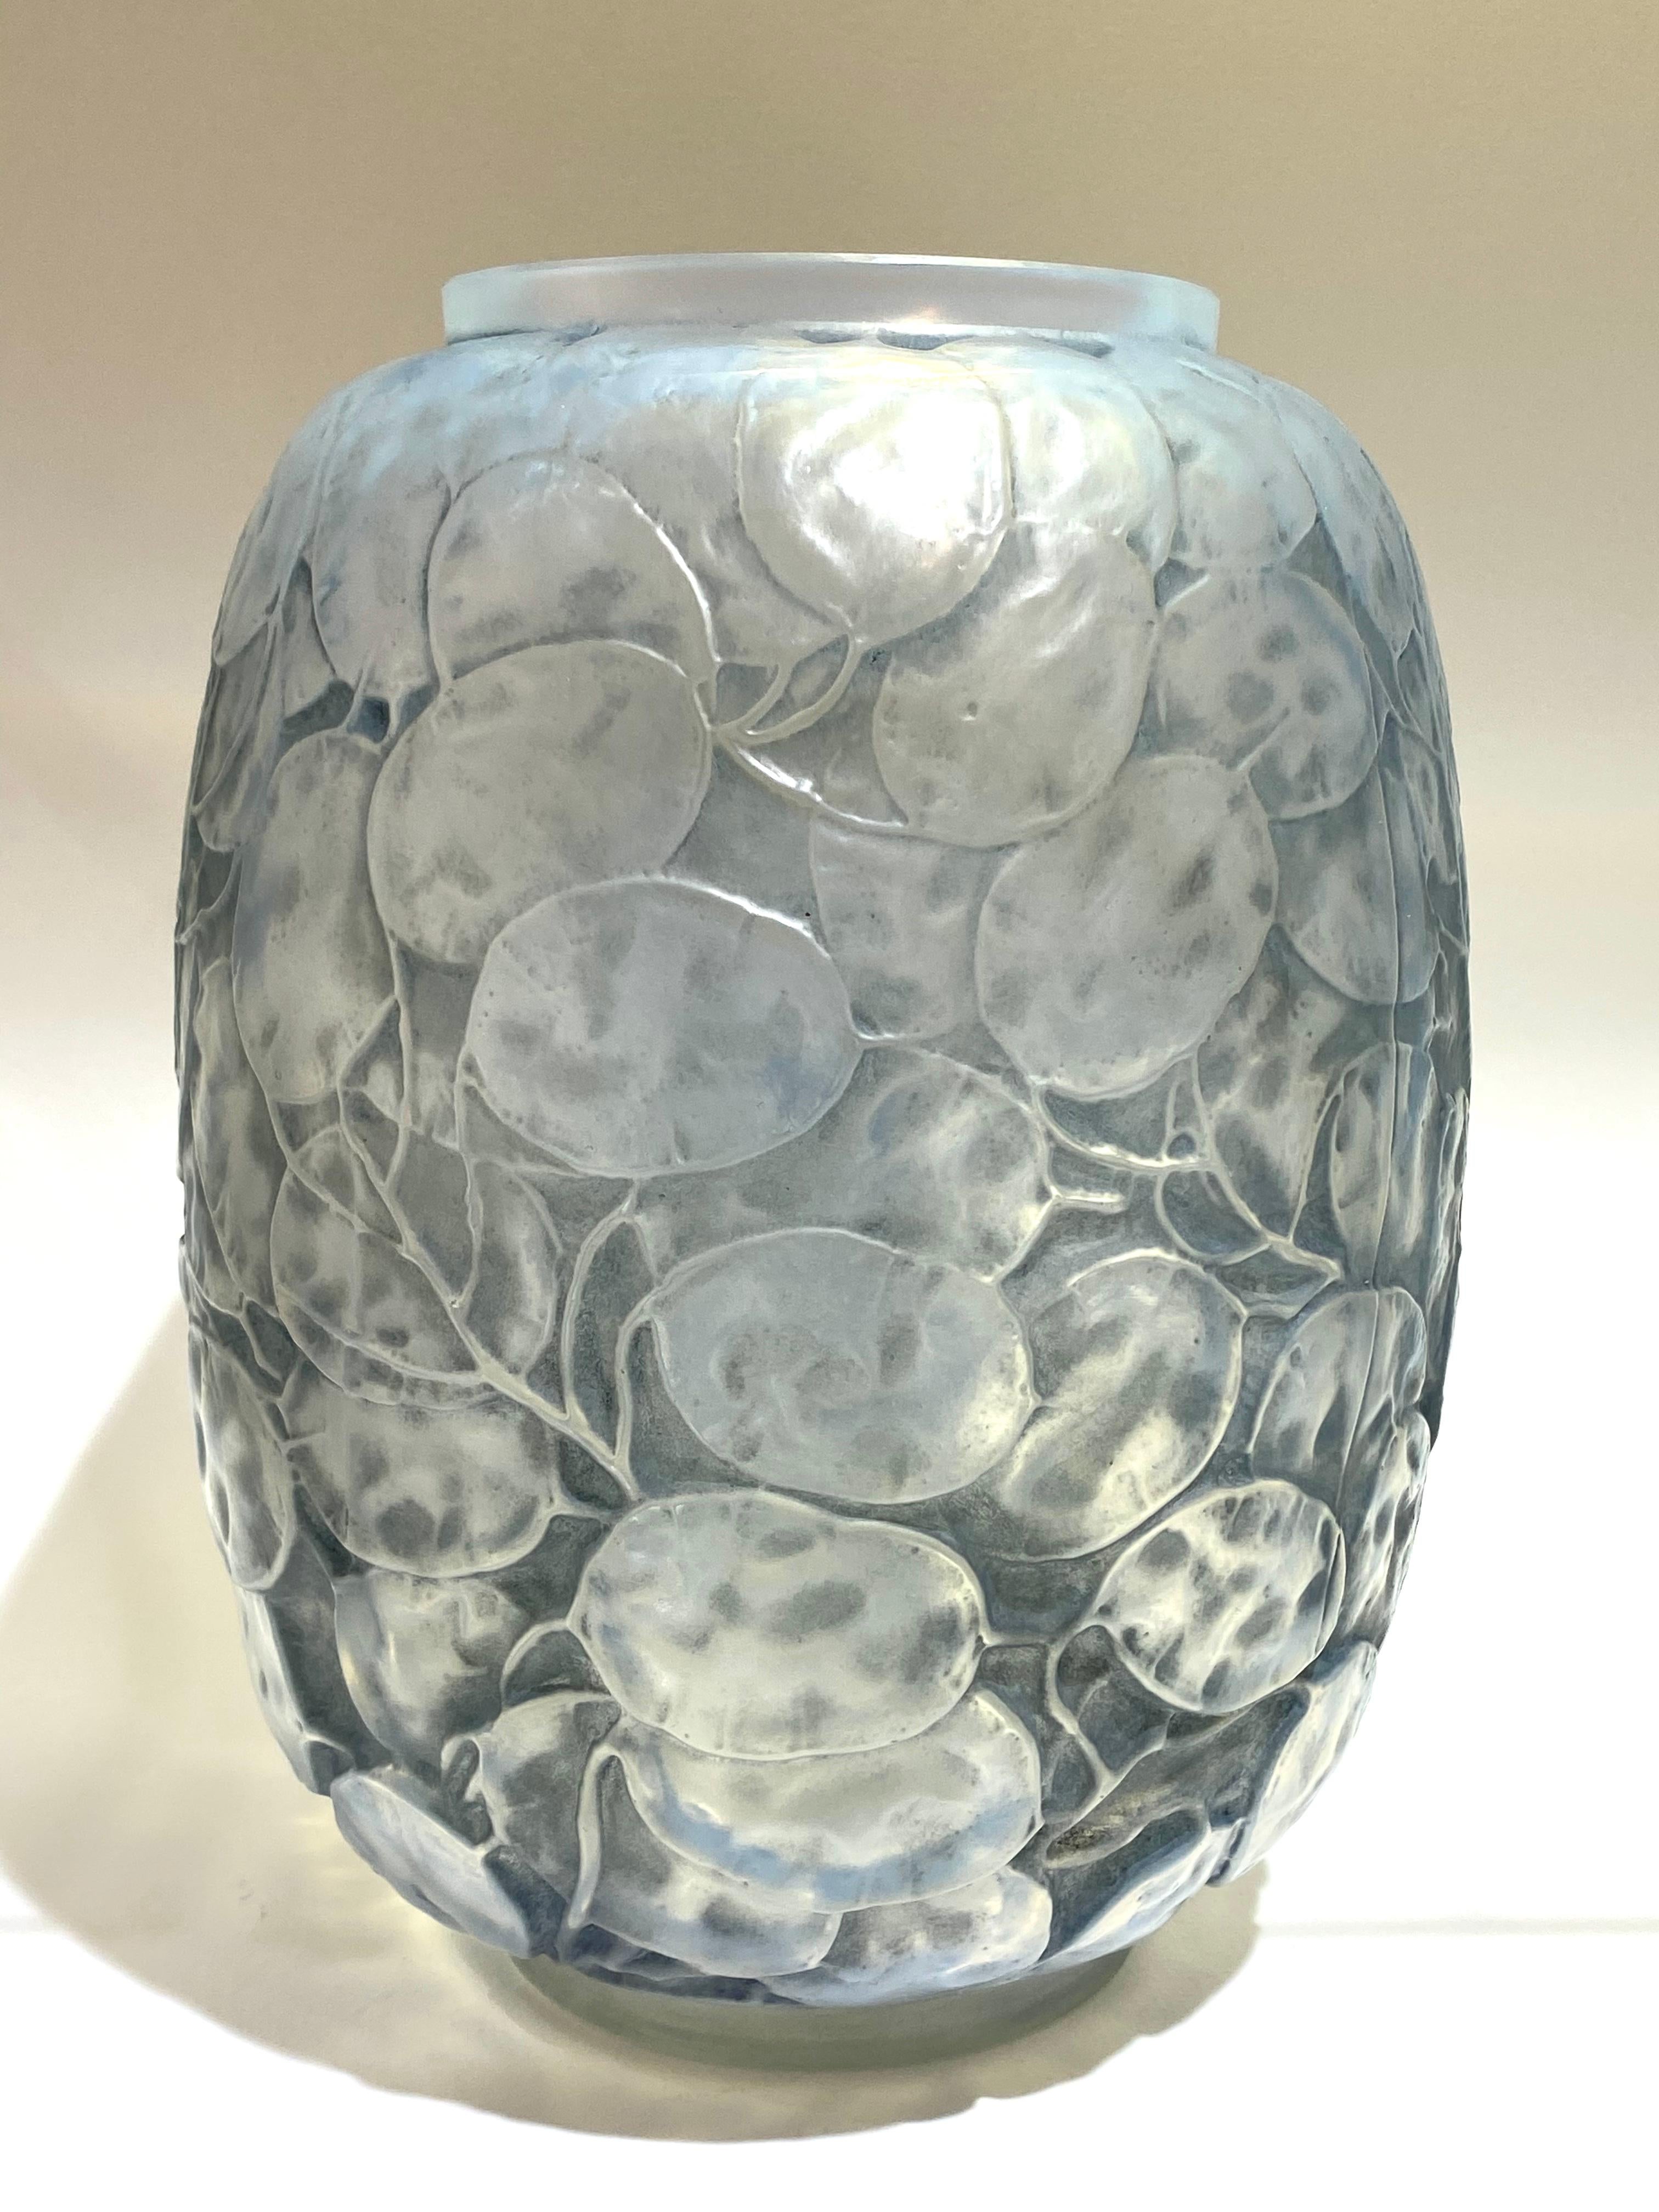 French 1914 Rene Lalique Monnaie du Pape Vase in Triple Cased Opalescent Glass Patina